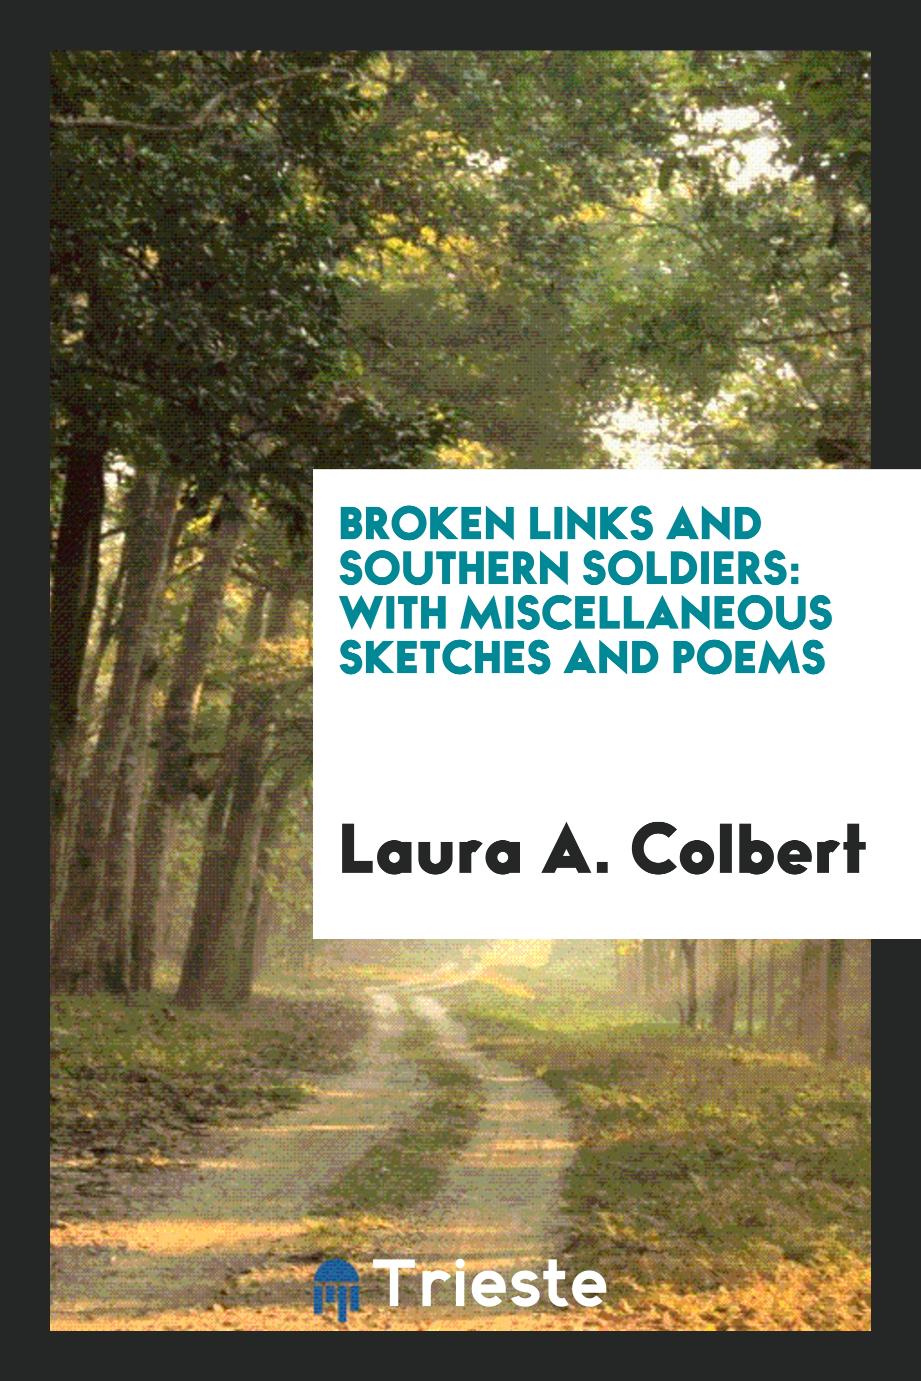 Broken Links and Southern Soldiers: With Miscellaneous Sketches and Poems